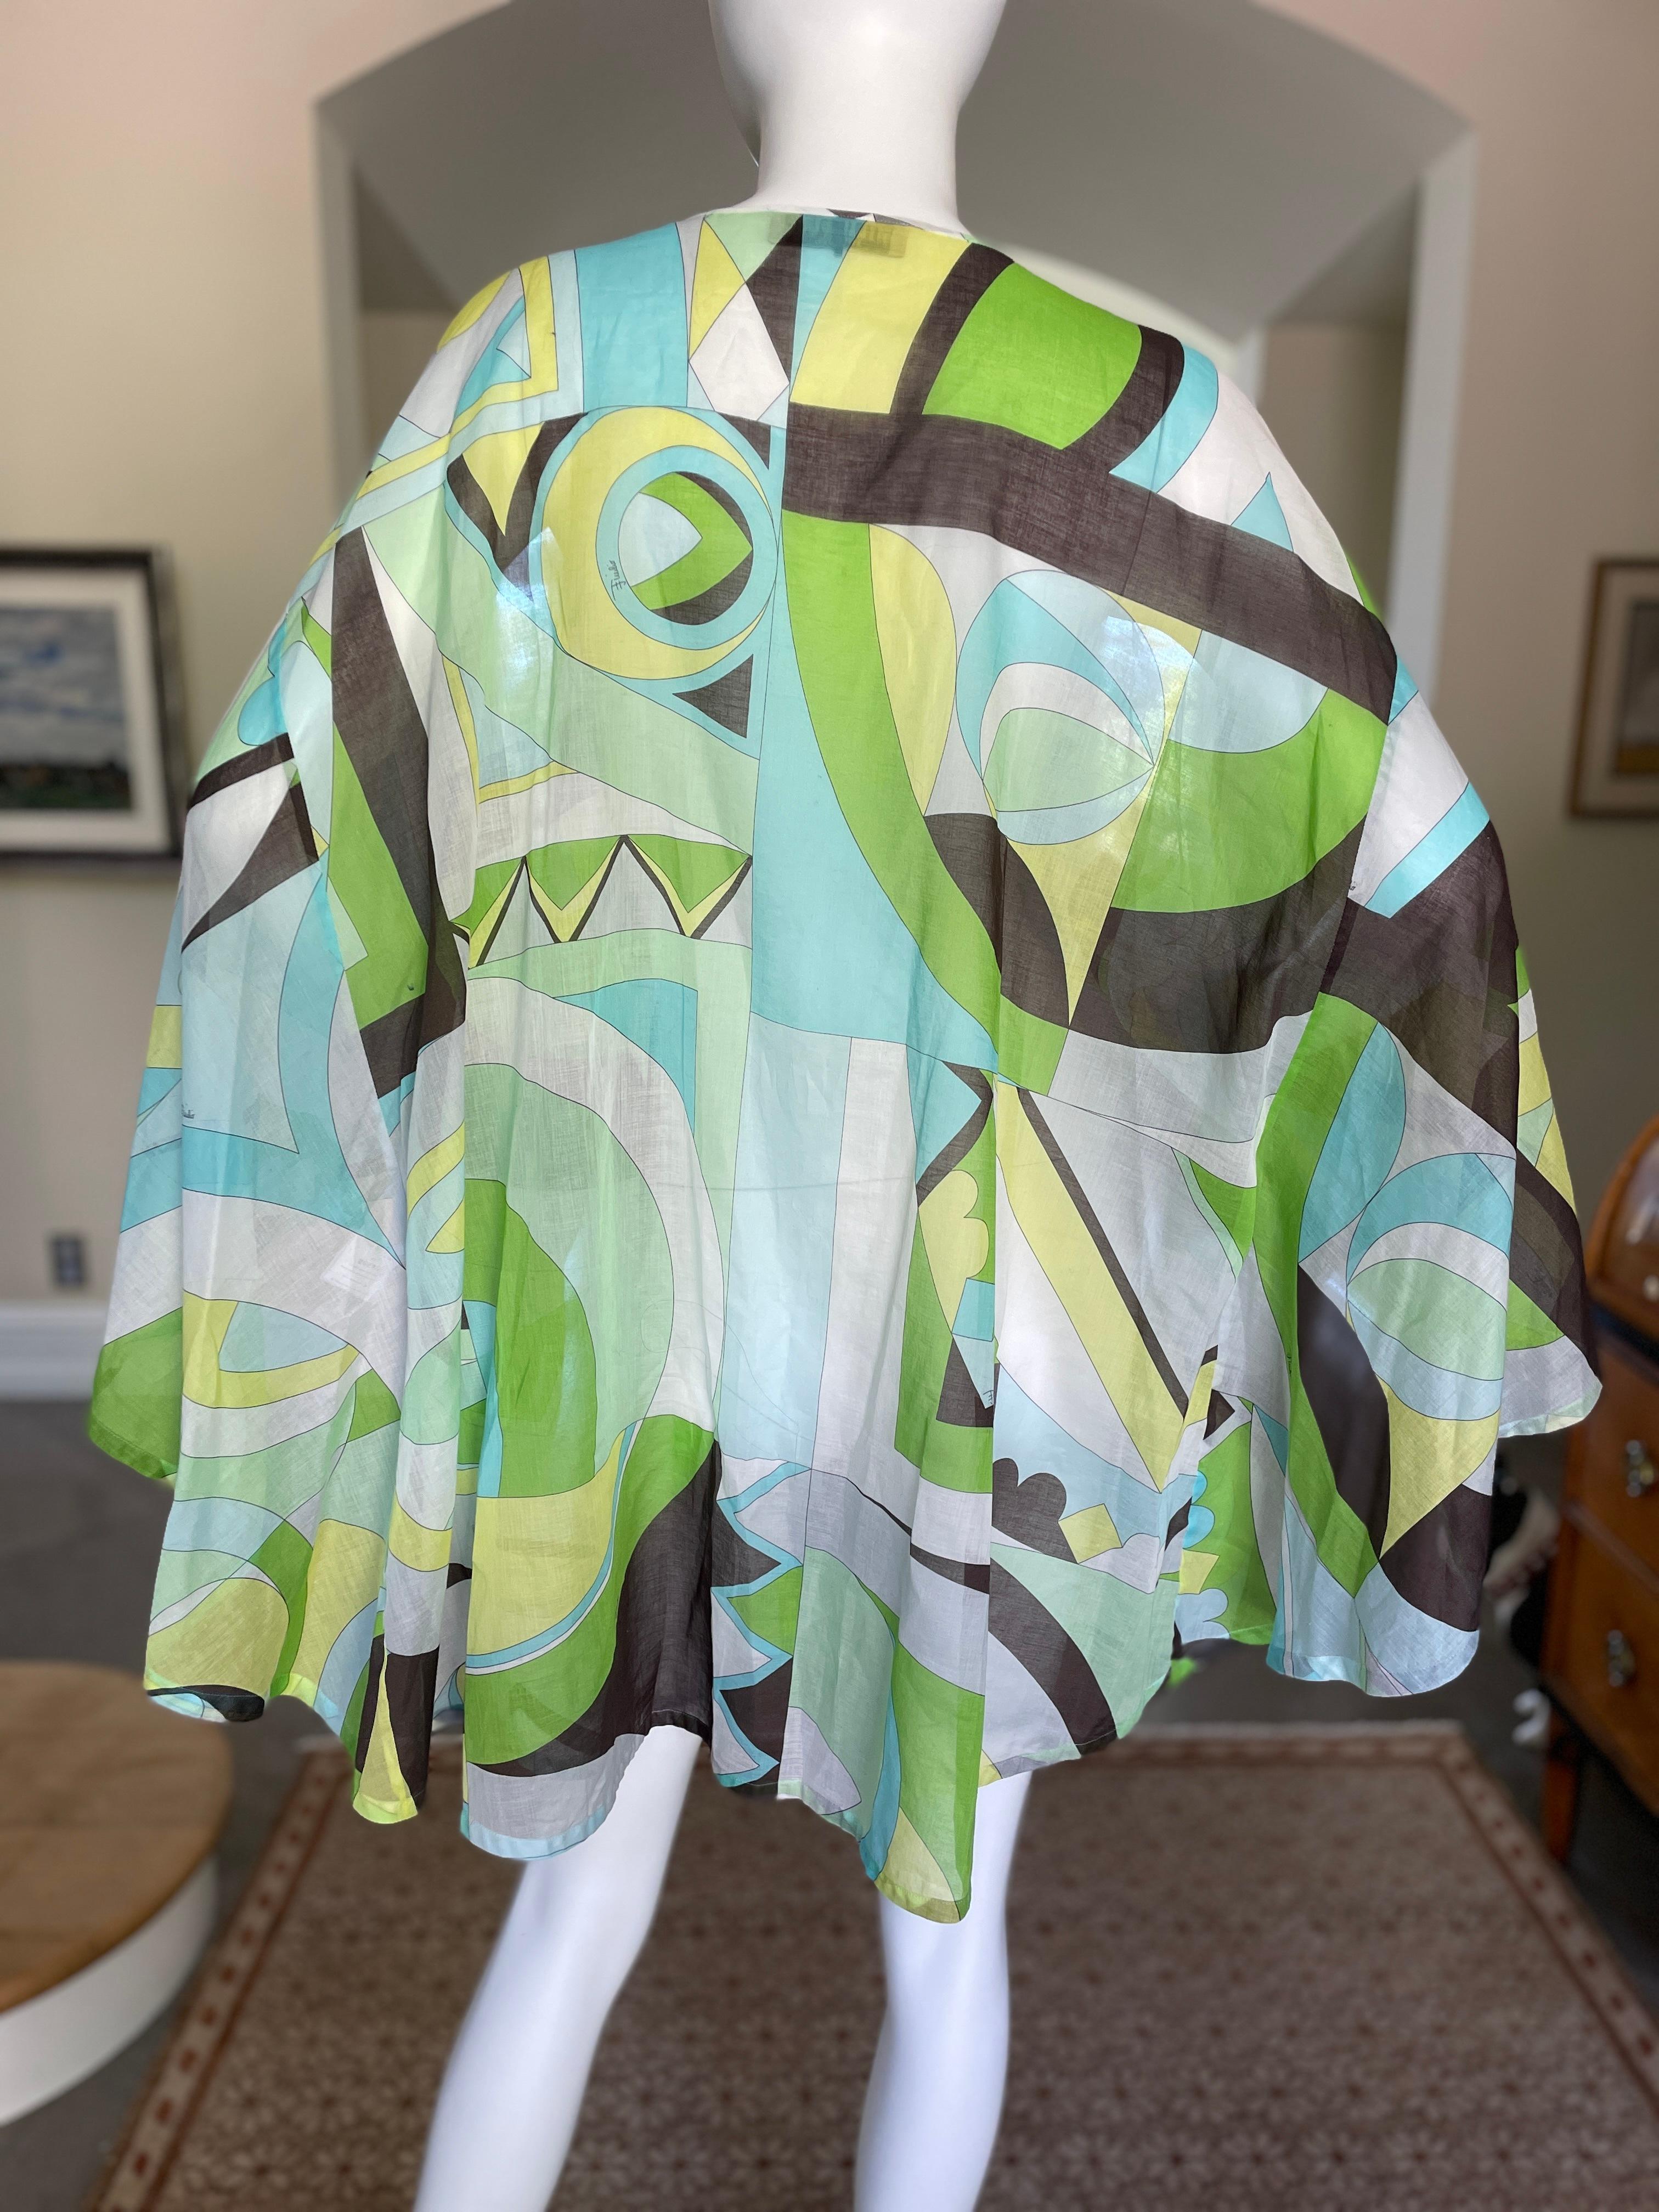 Emilio Pucci Vintage FIne  Cotton Caftan Beach Cover 
So pretty , please use the zoom feature to see details
One size fits all
Size 8 
Excellent  condition